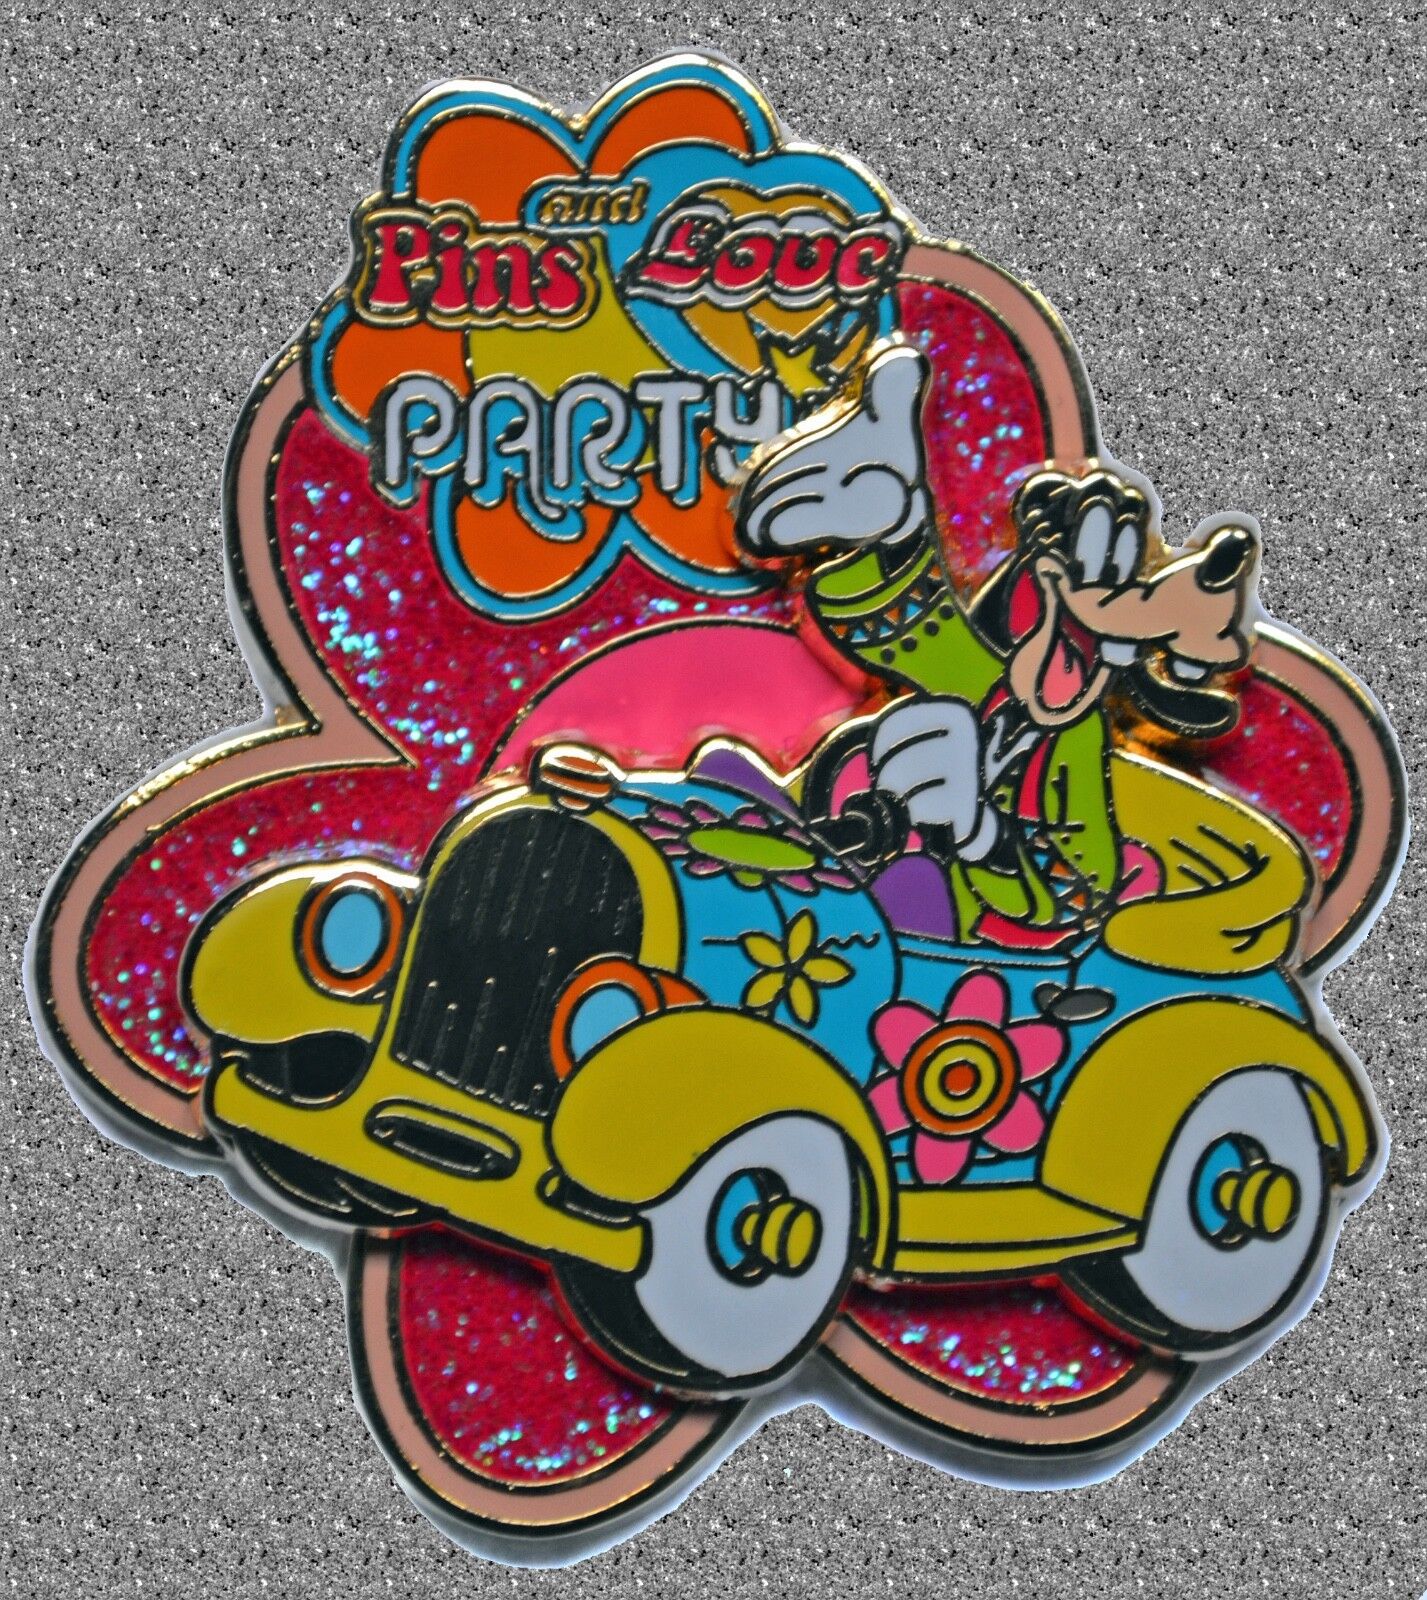 Pins & Love Party Boxed Pin - Goofy in Yellow Car - DISNEY Pin LE 600 DLP